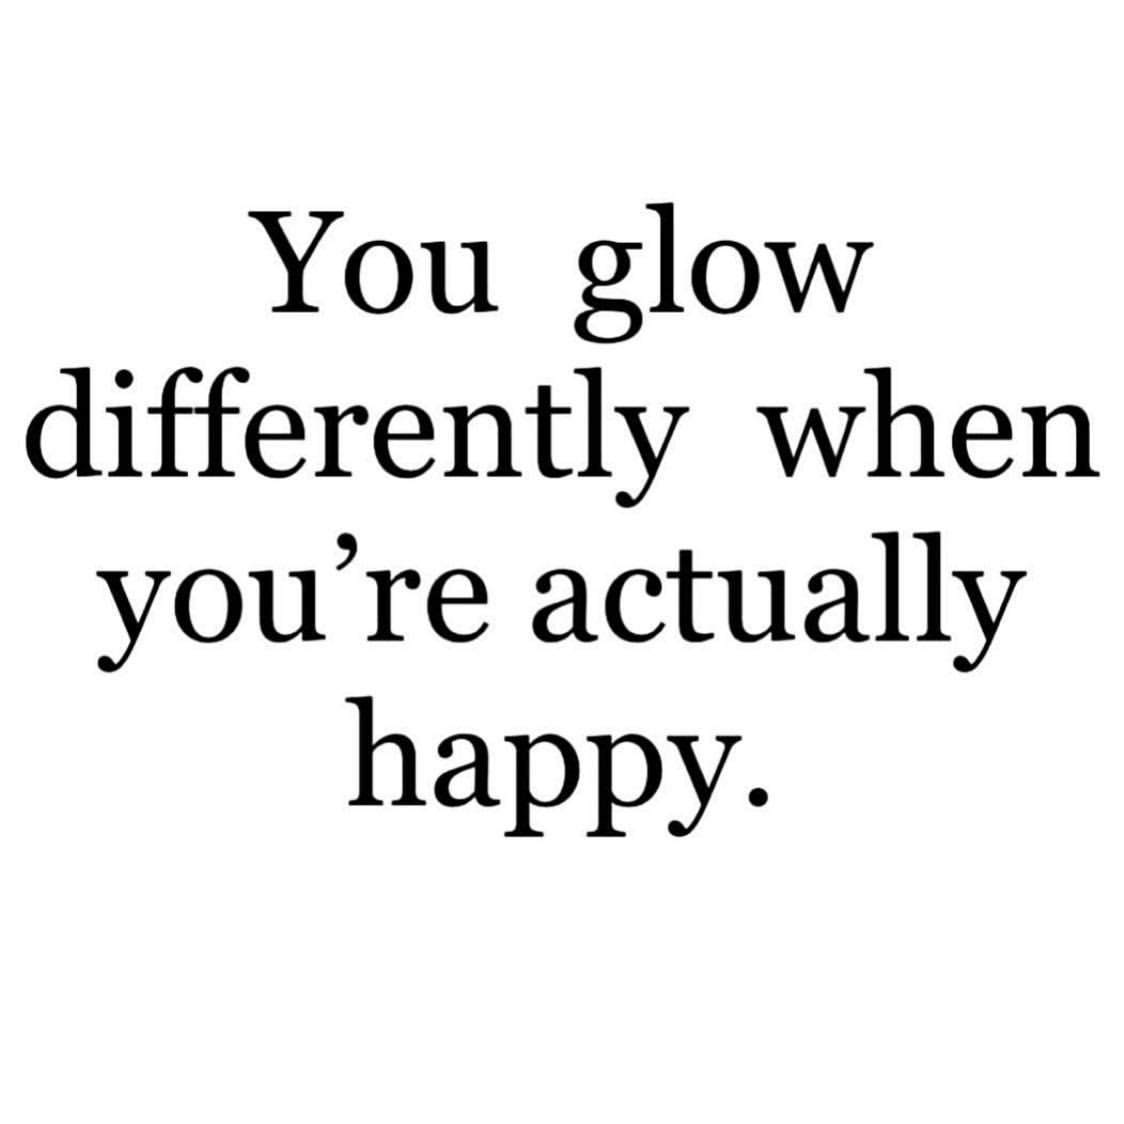 You glow differently when you're actually happy.